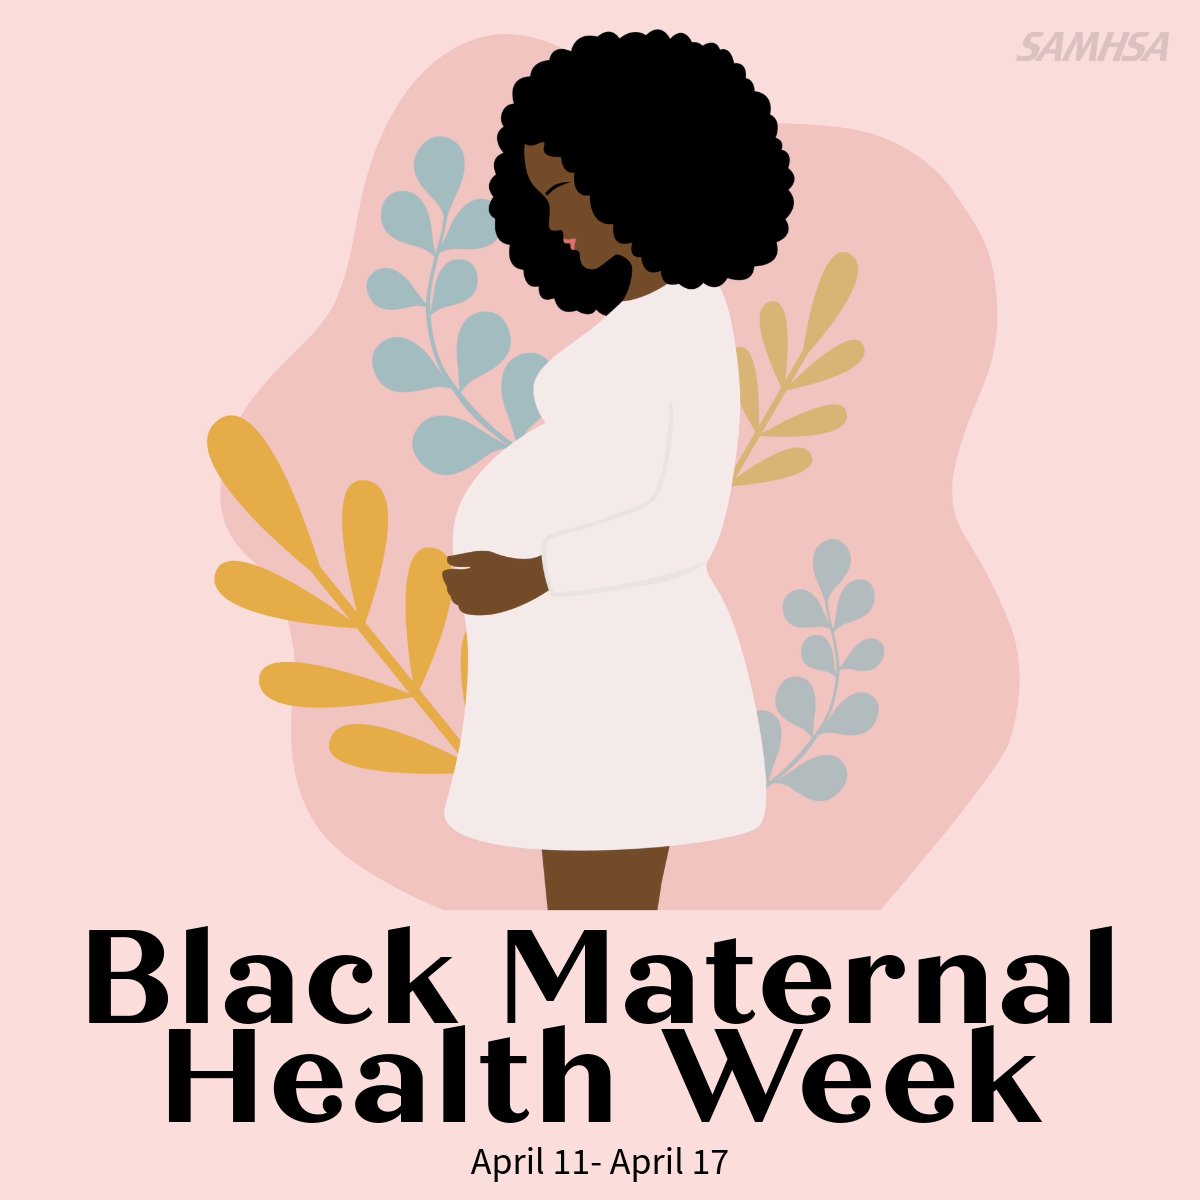 Join us this #BlackMaternalHealthWeek in raising awareness and advocating for comprehensive care, including safe and effective substance use treatment options, to support pregnant people and ensure health outcomes for all. #BMHW #BMHW24 store.samhsa.gov/product/adviso…